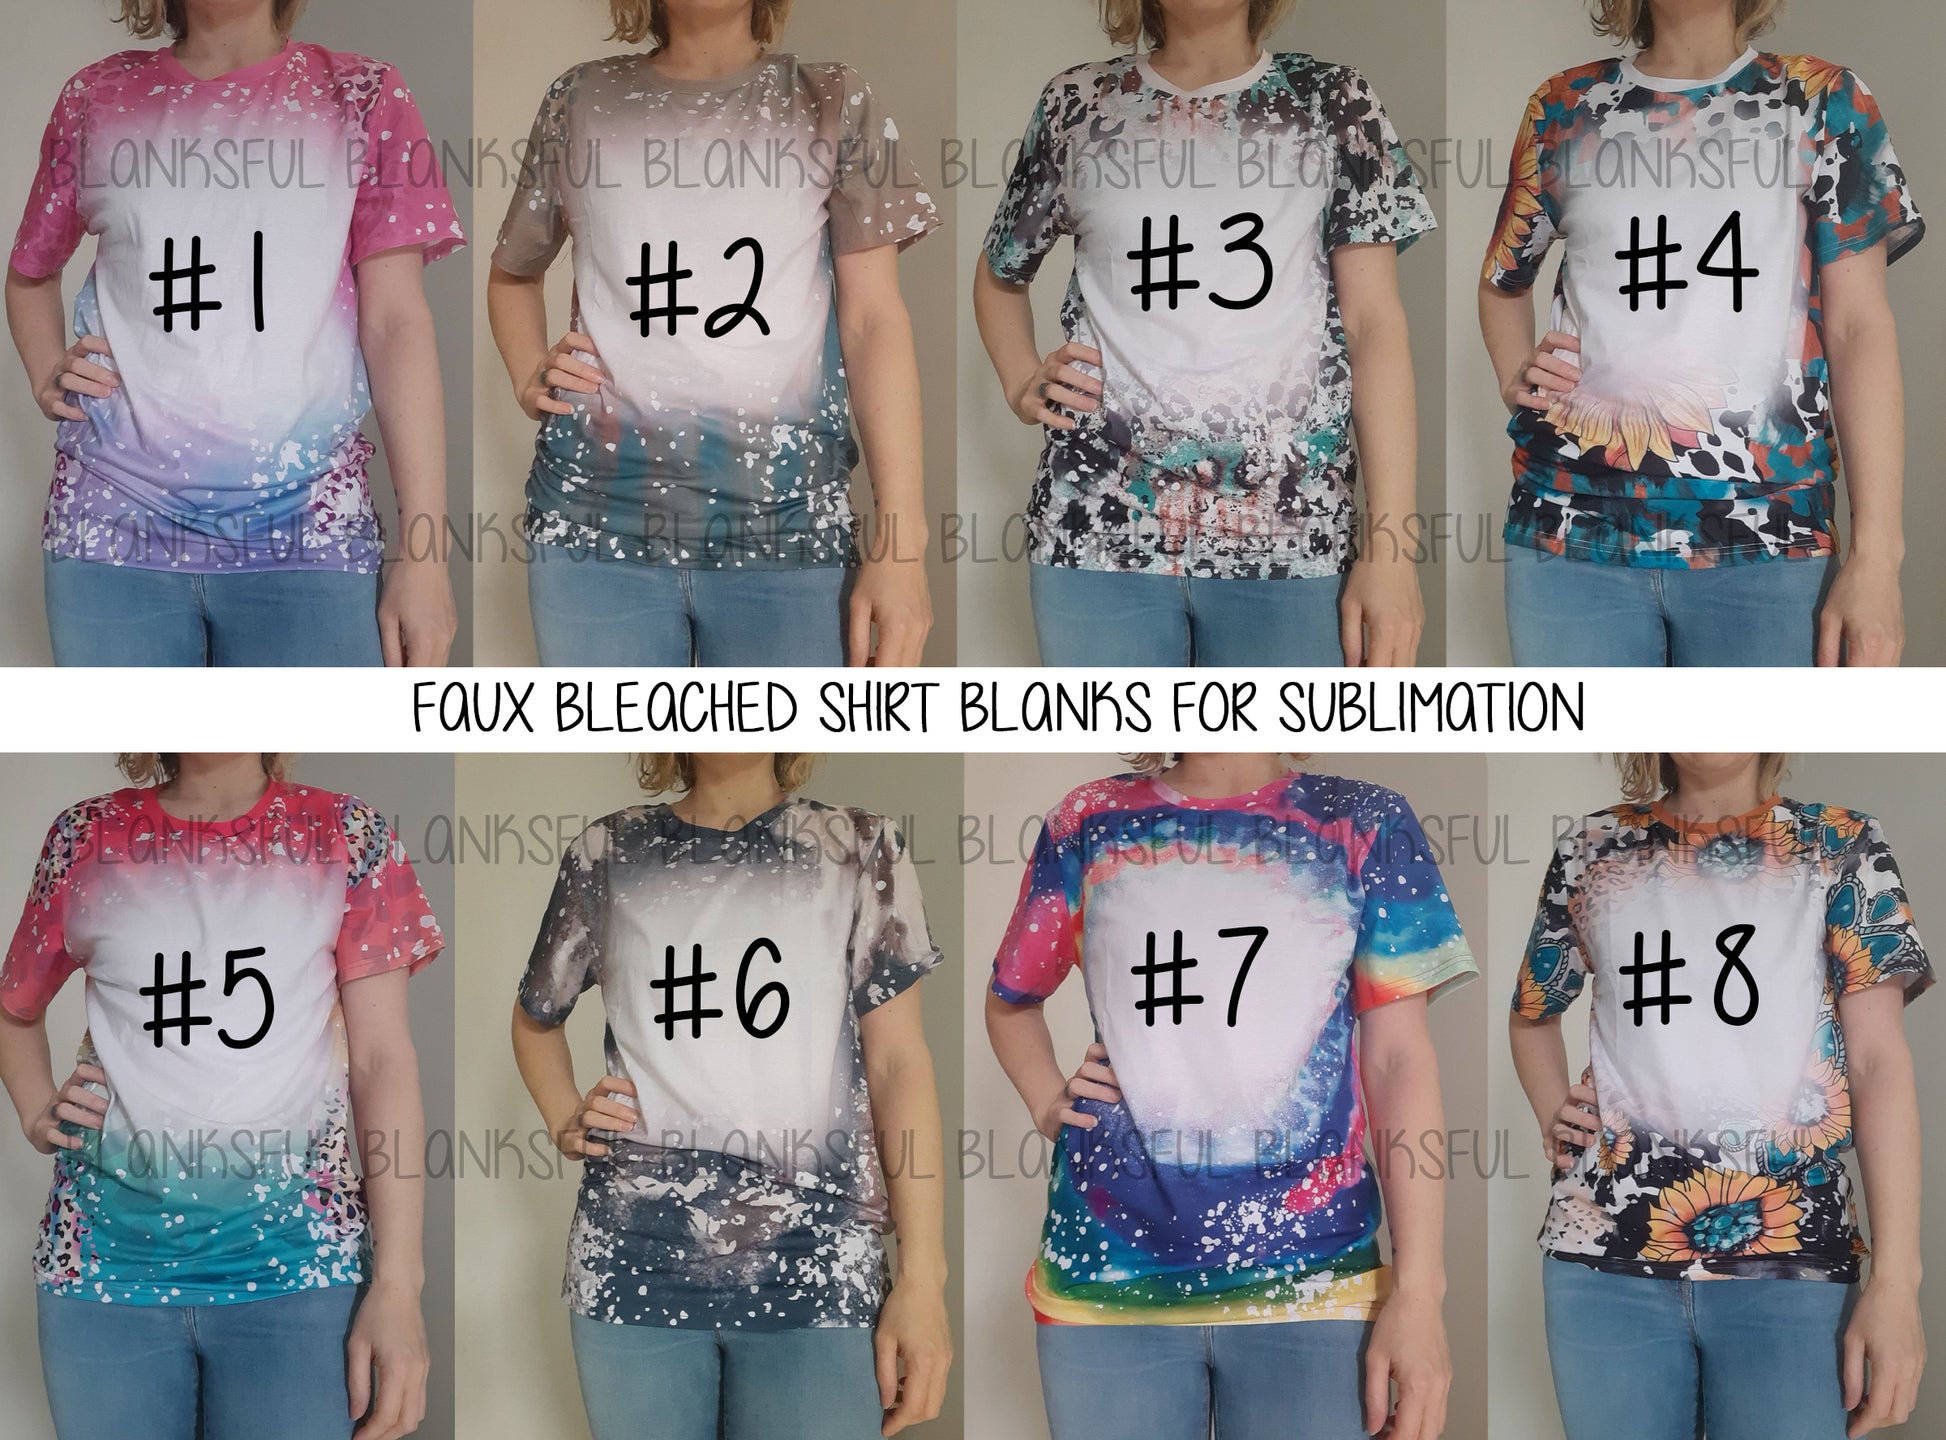 Sublimation Hoodies FAUX BLEACH Fleece Lined Soft 100% Polyester